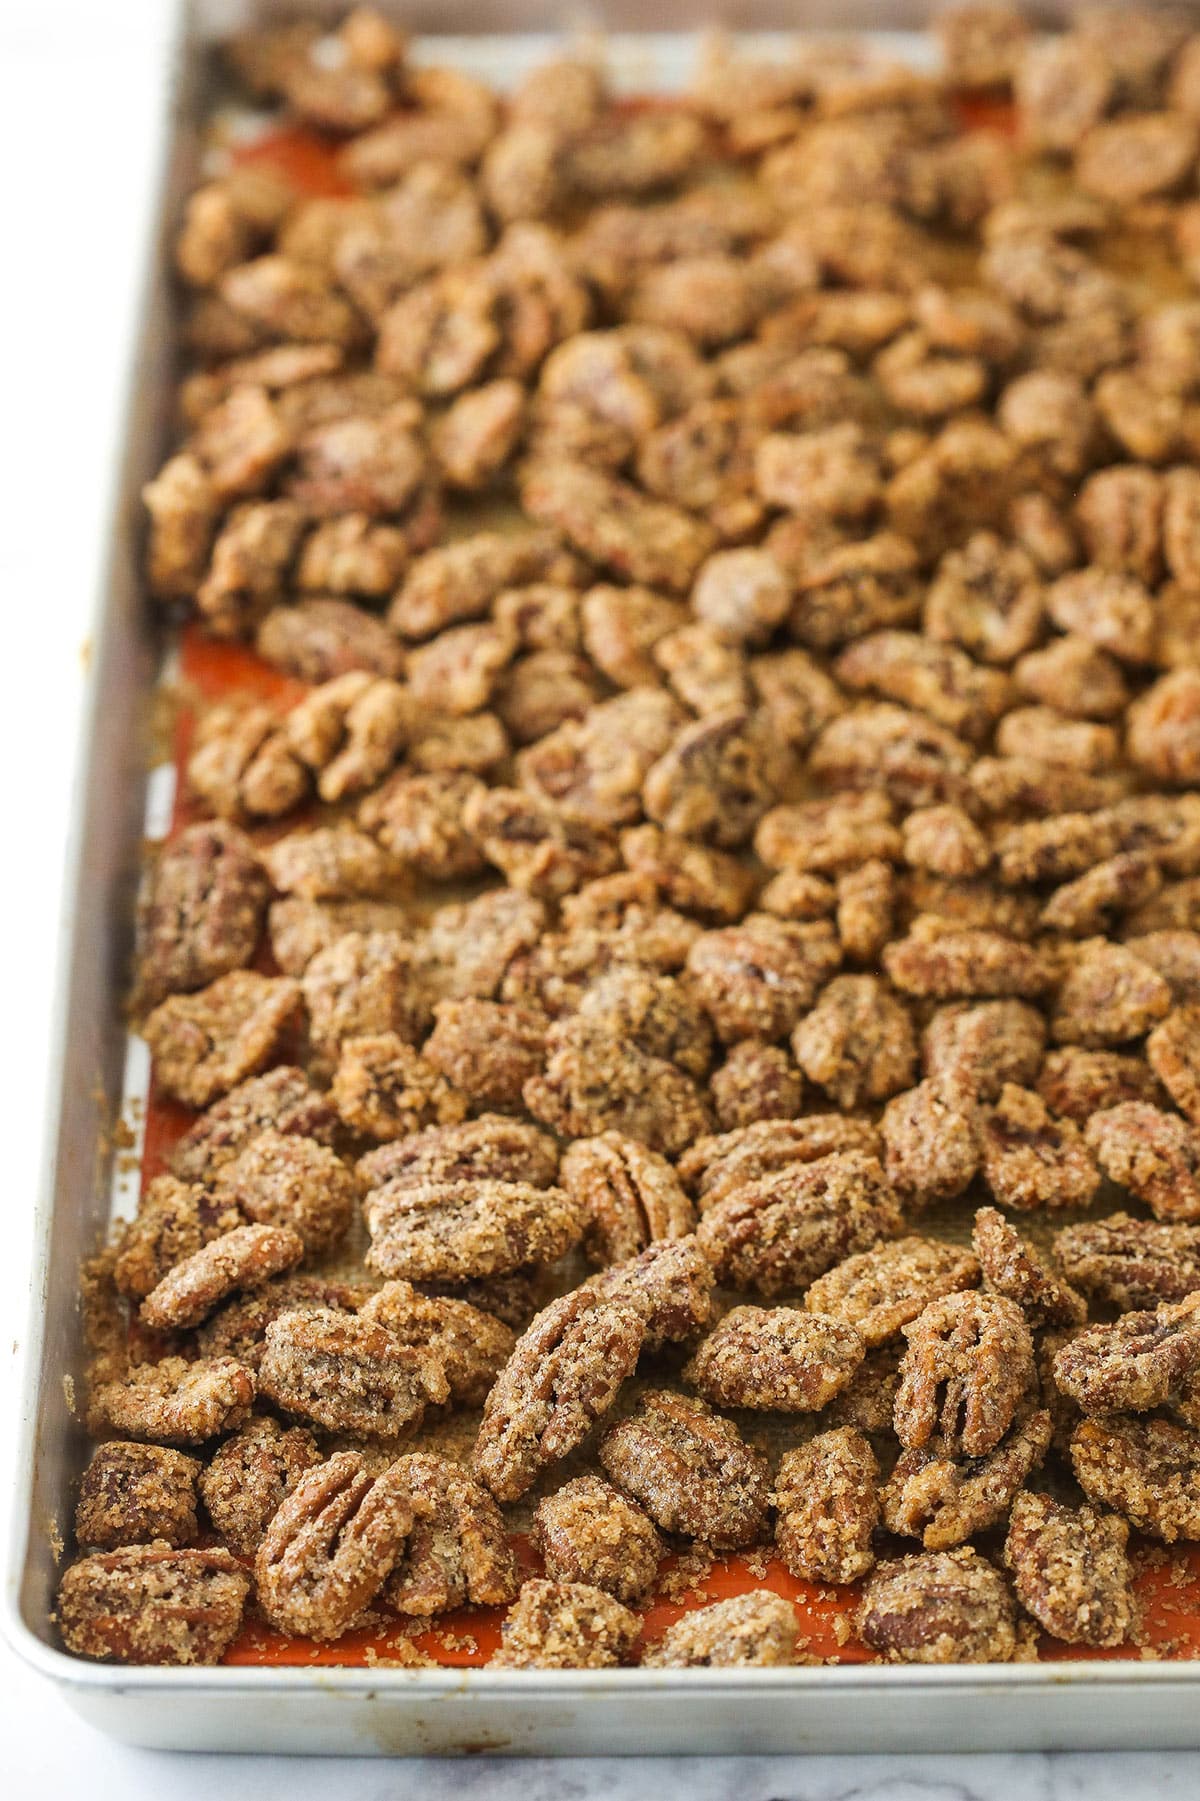 Freshly baked cinnamon sugar pecans on a lined baking sheet with a raised rim